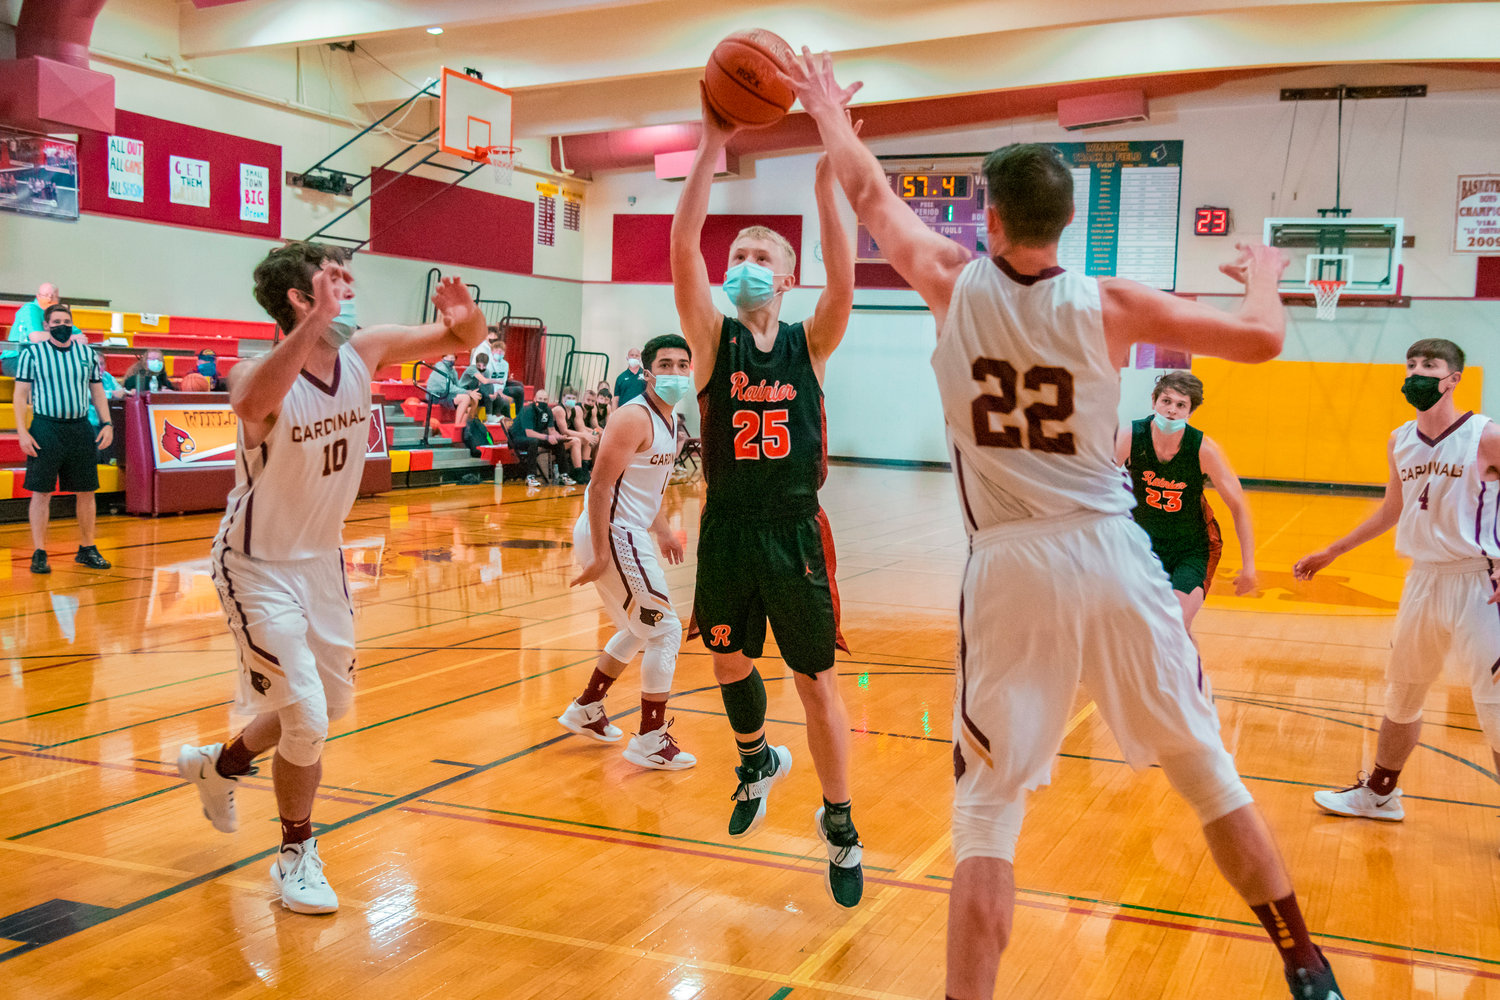 Rainier’s Brody Landram (25) makes a shot over defenders during a game in Winlock on Wednesday.